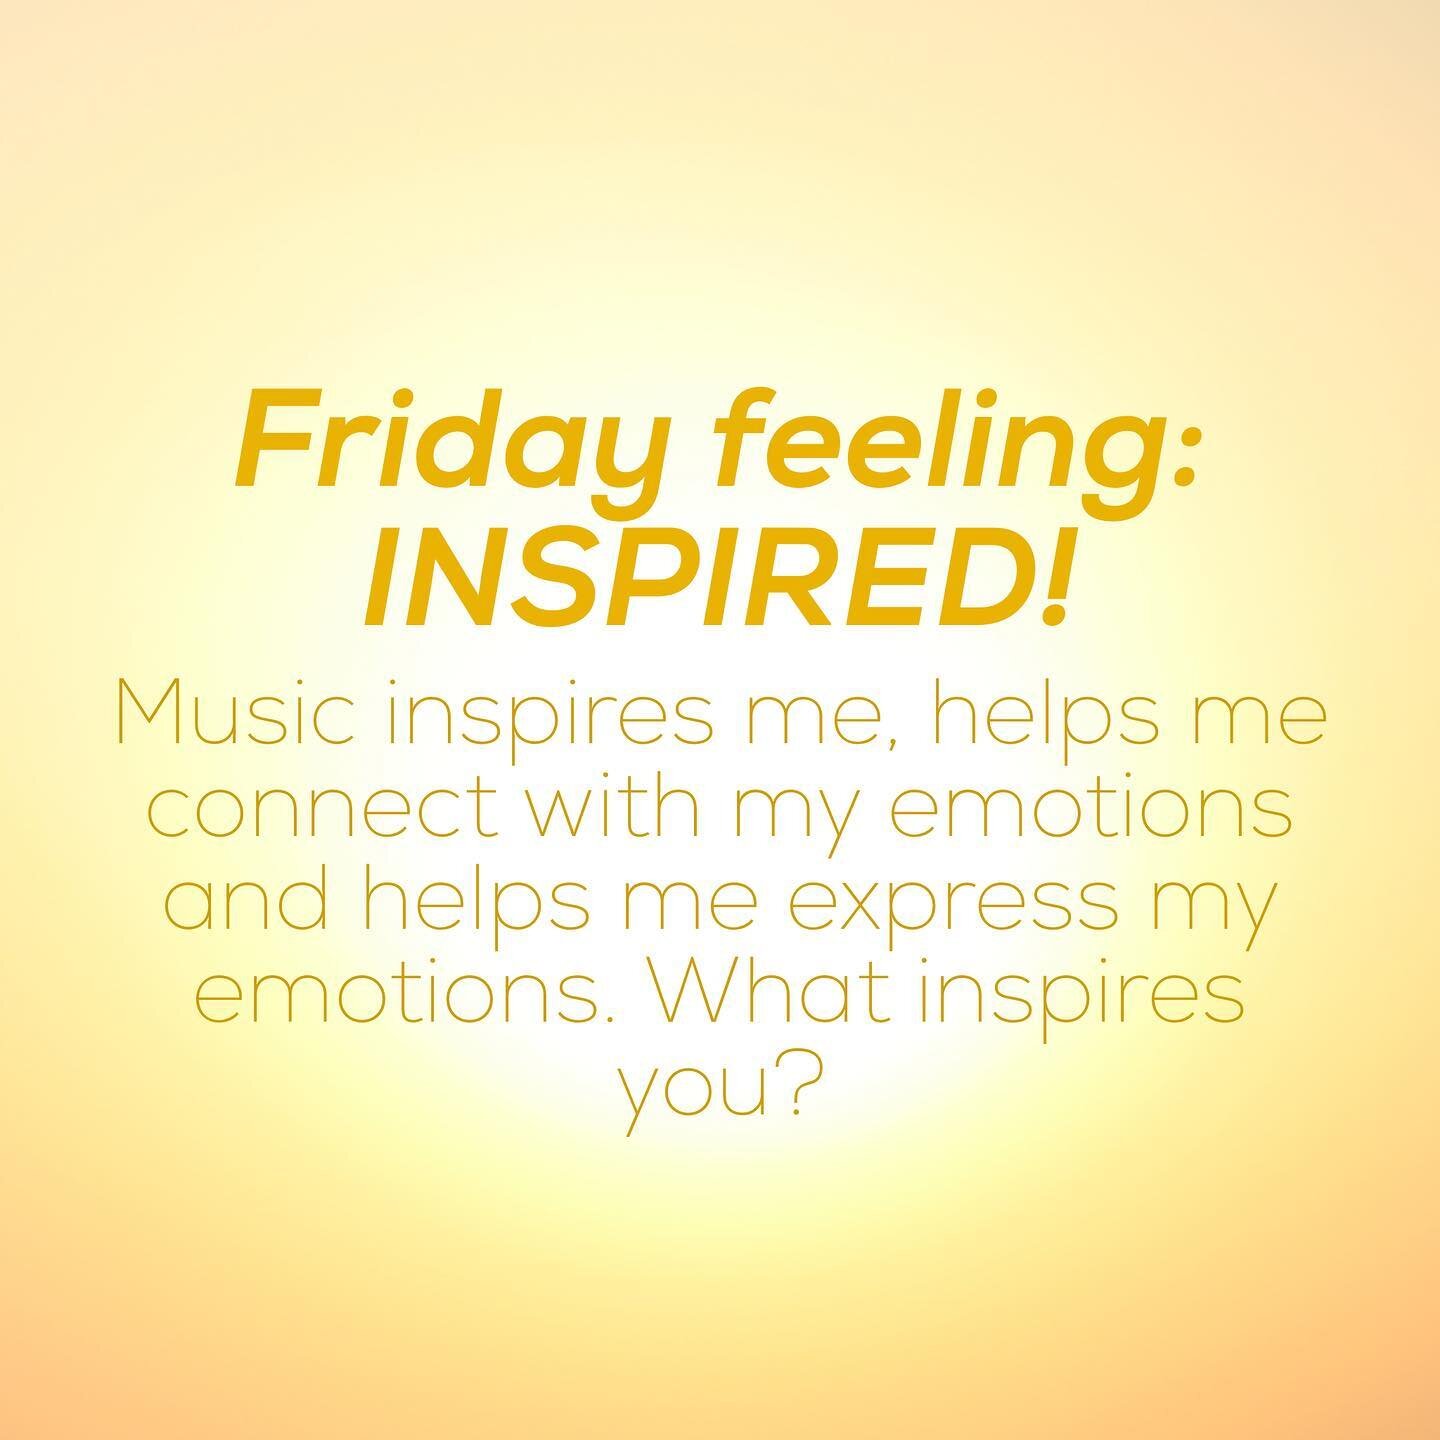 Today I am feeling INSPIRED! Especially by music and the song Talk to Me by Cavetown. What inspires you?